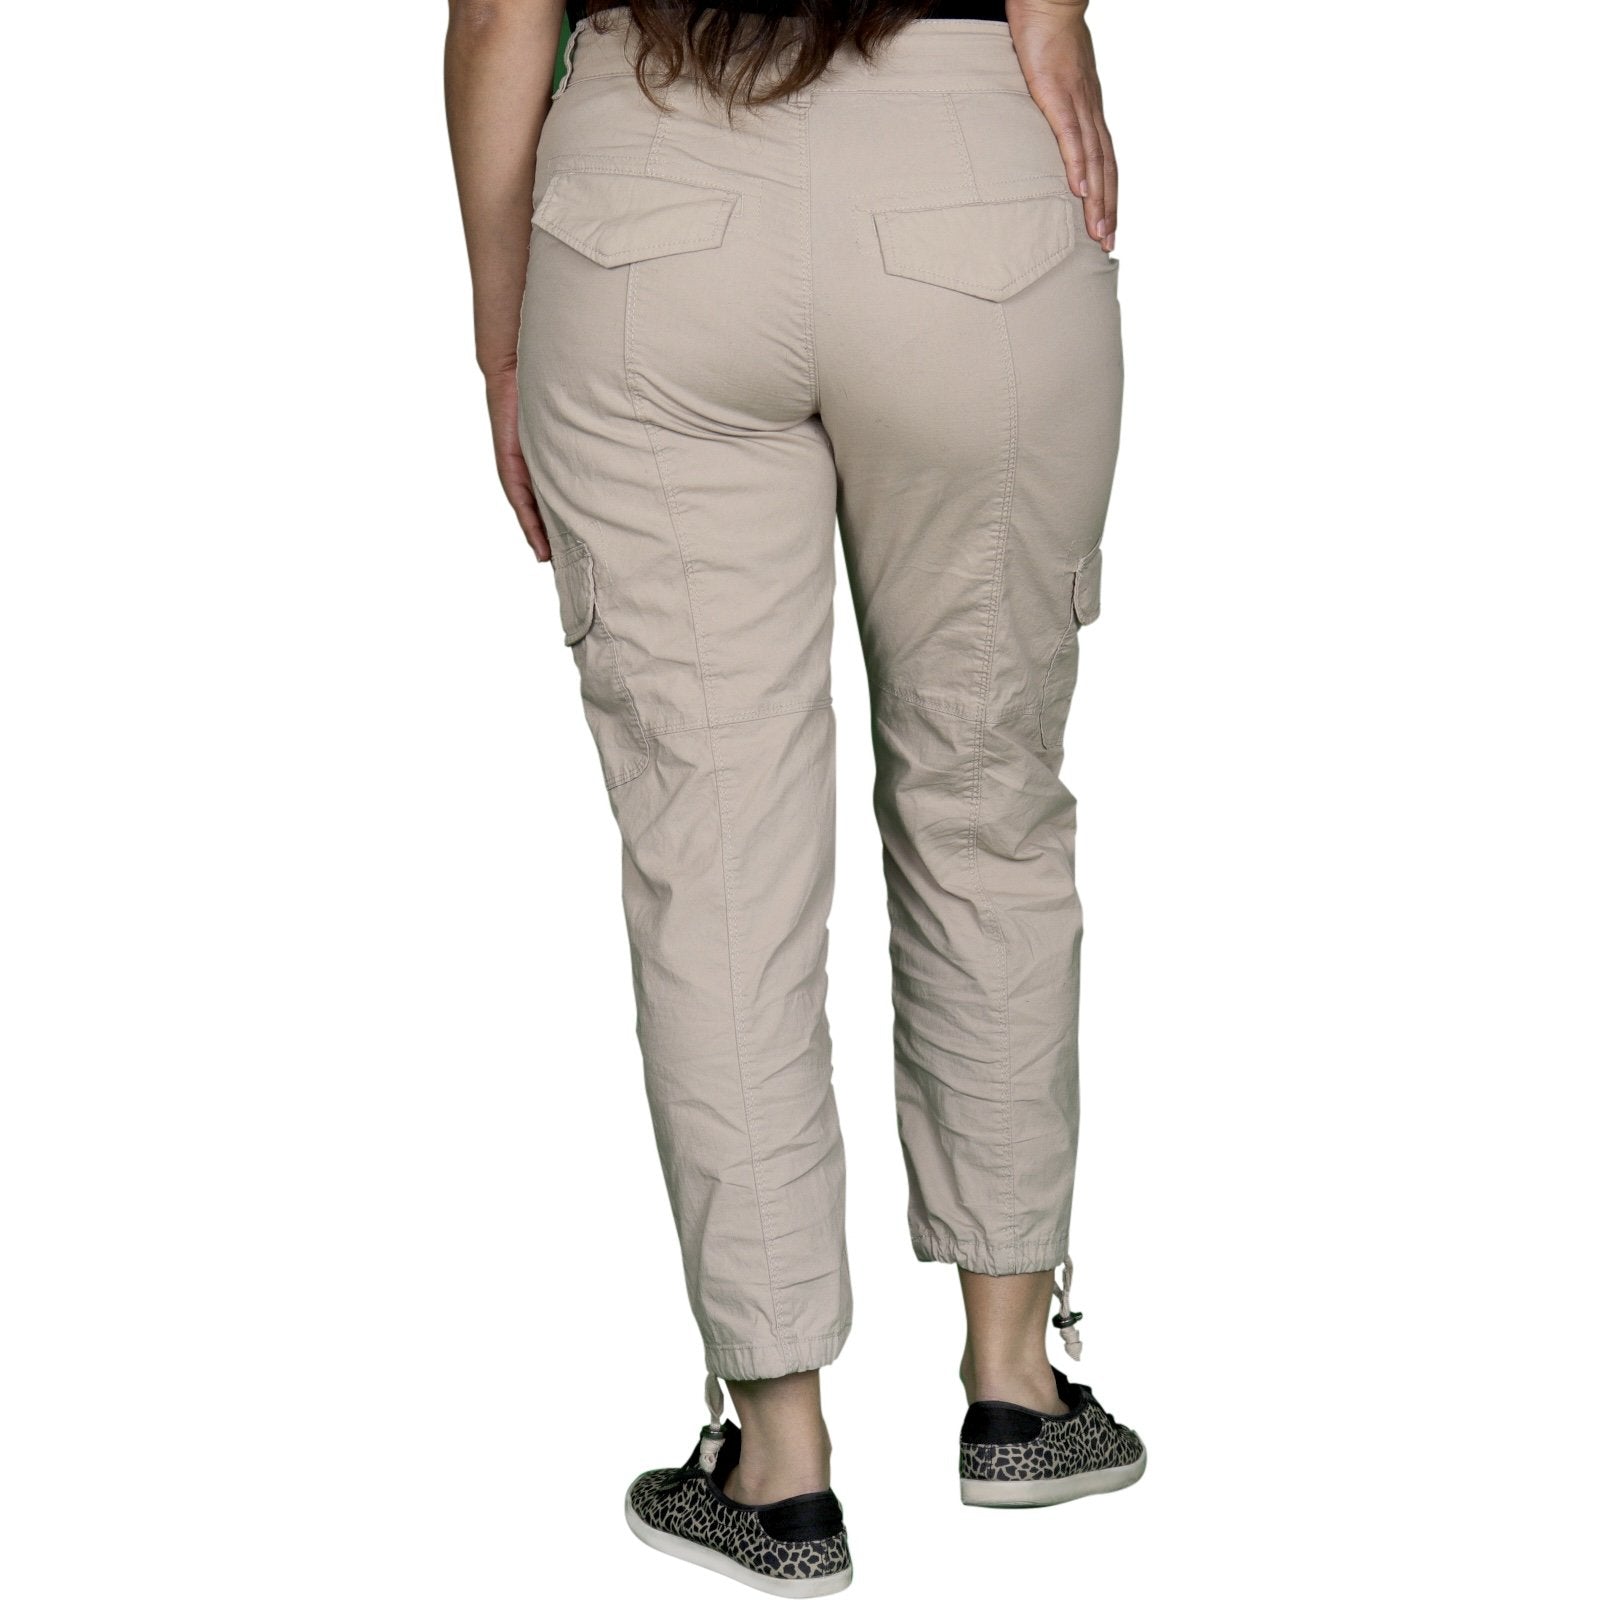 Womens Stretched Capri Long pants with Cargo pockets